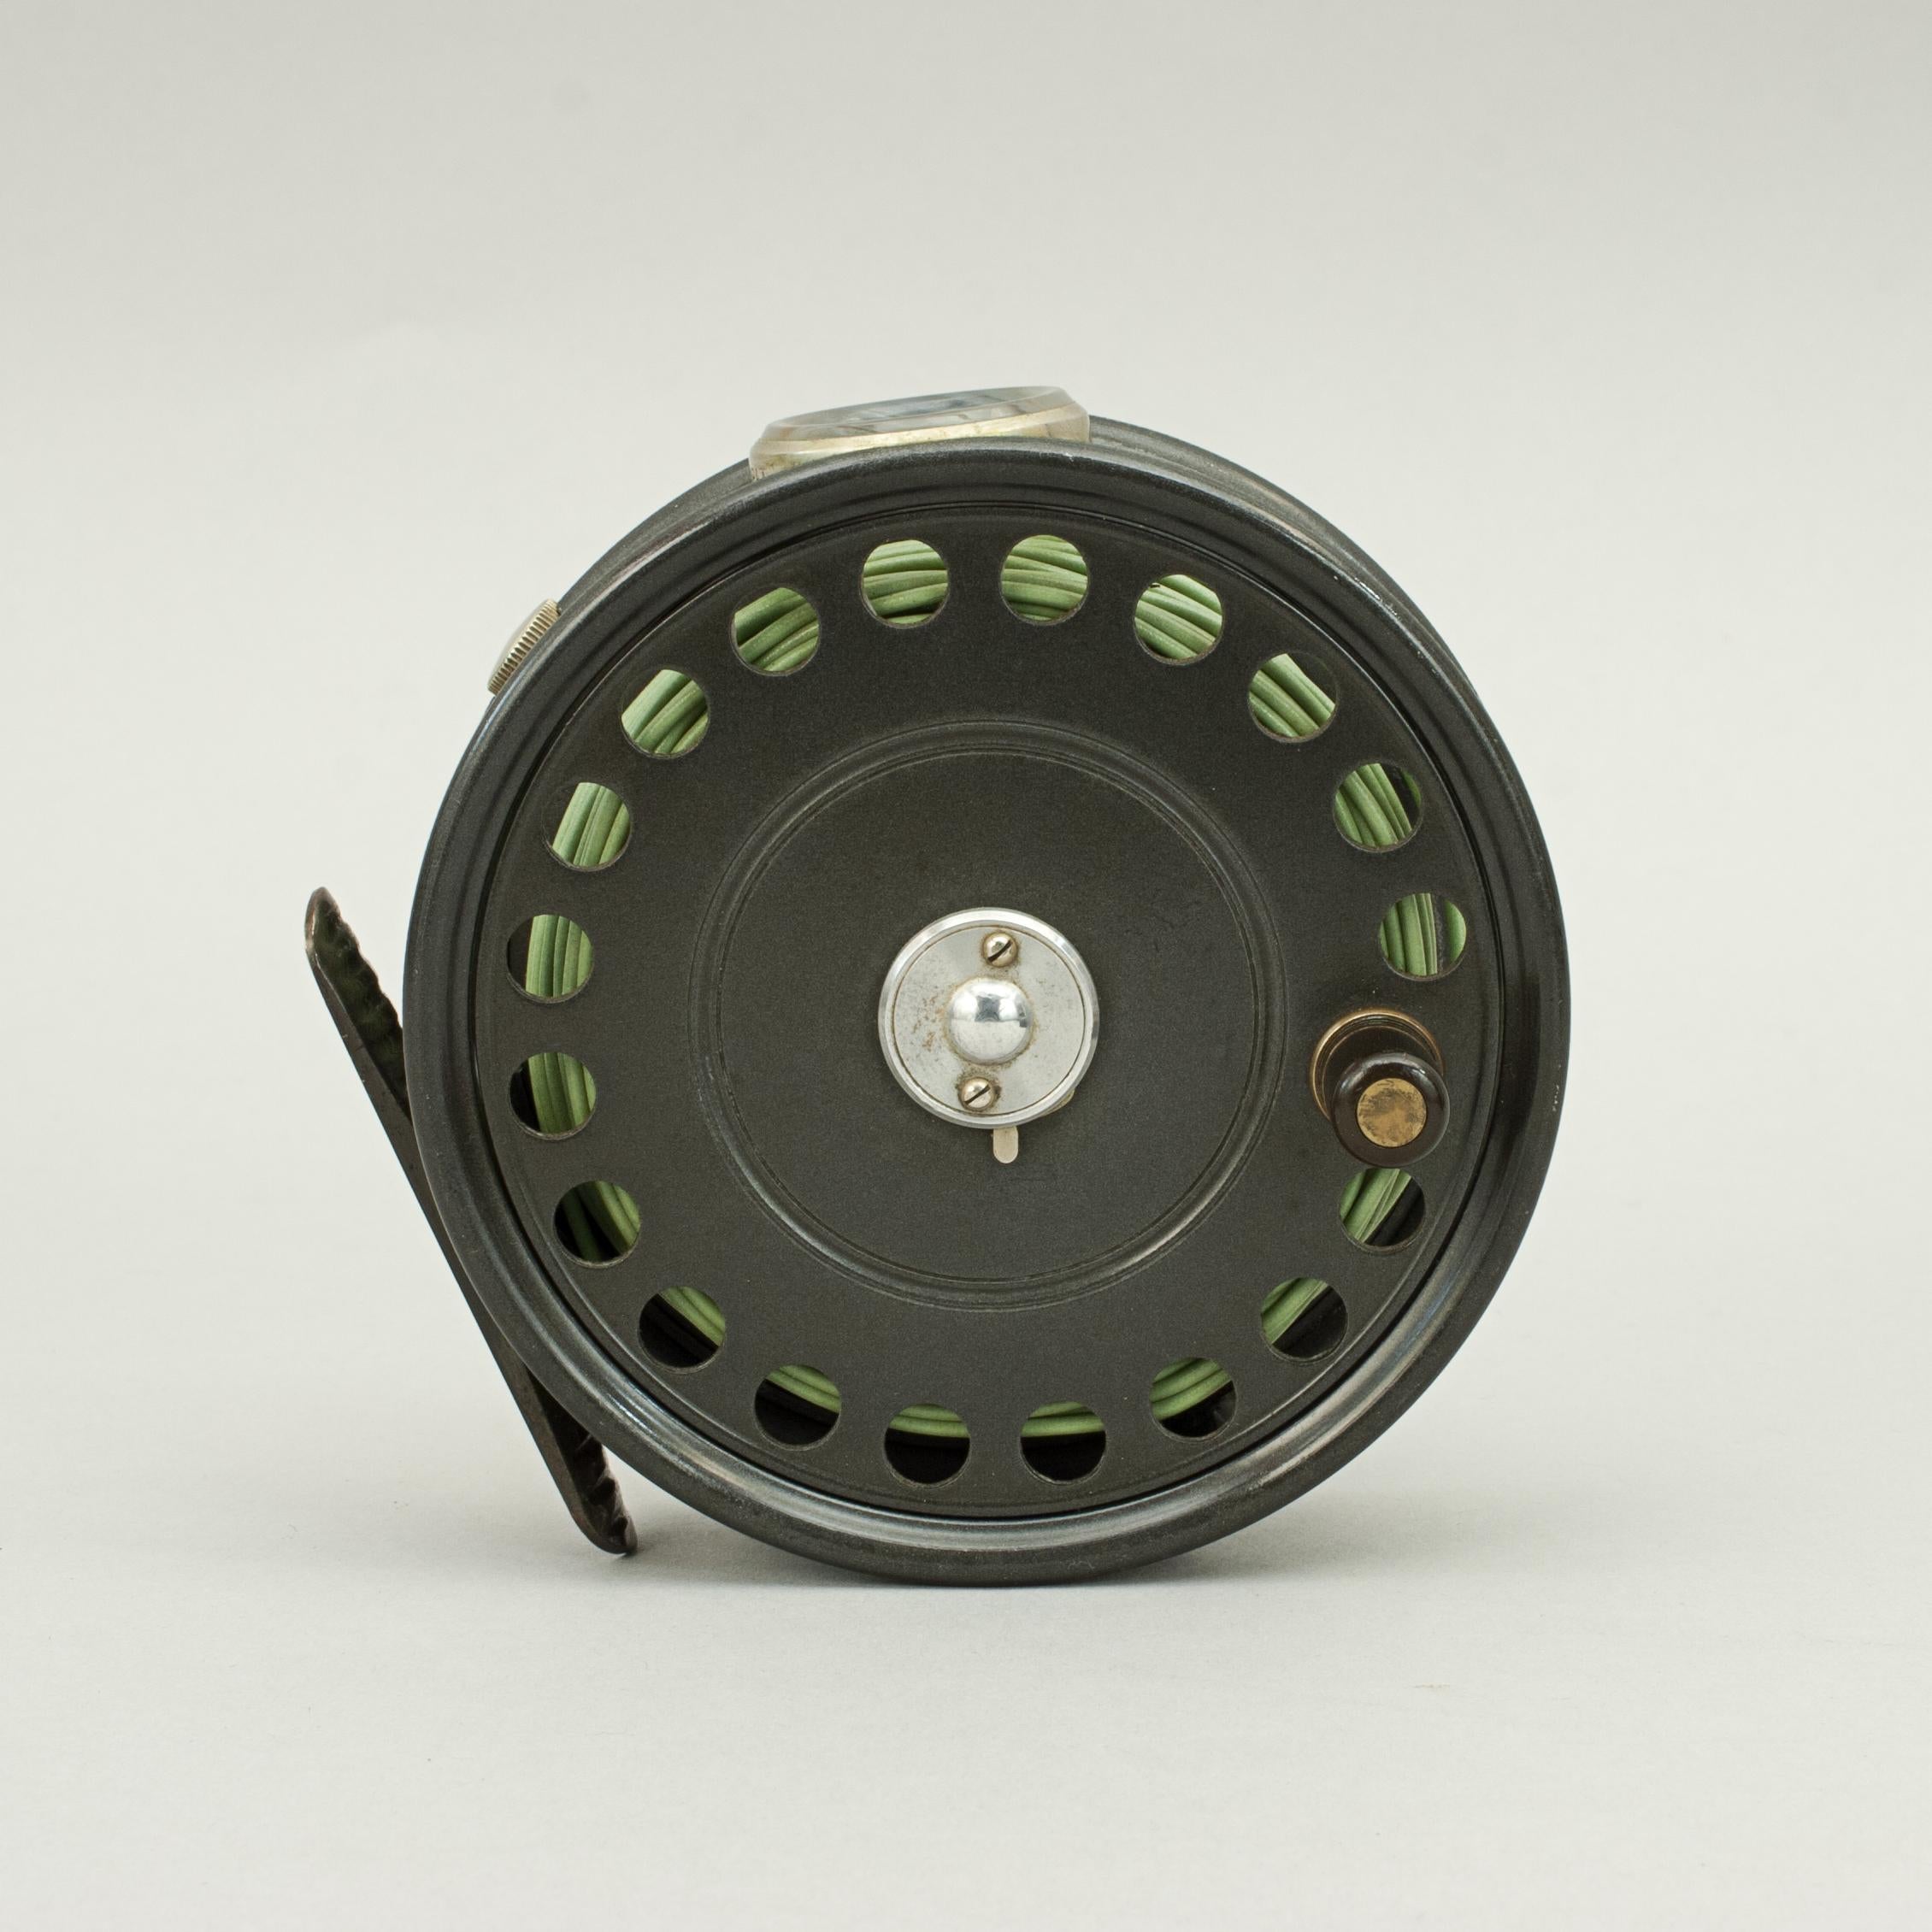 Aluminum St George Fly Fishing Reel by Hardy Bros